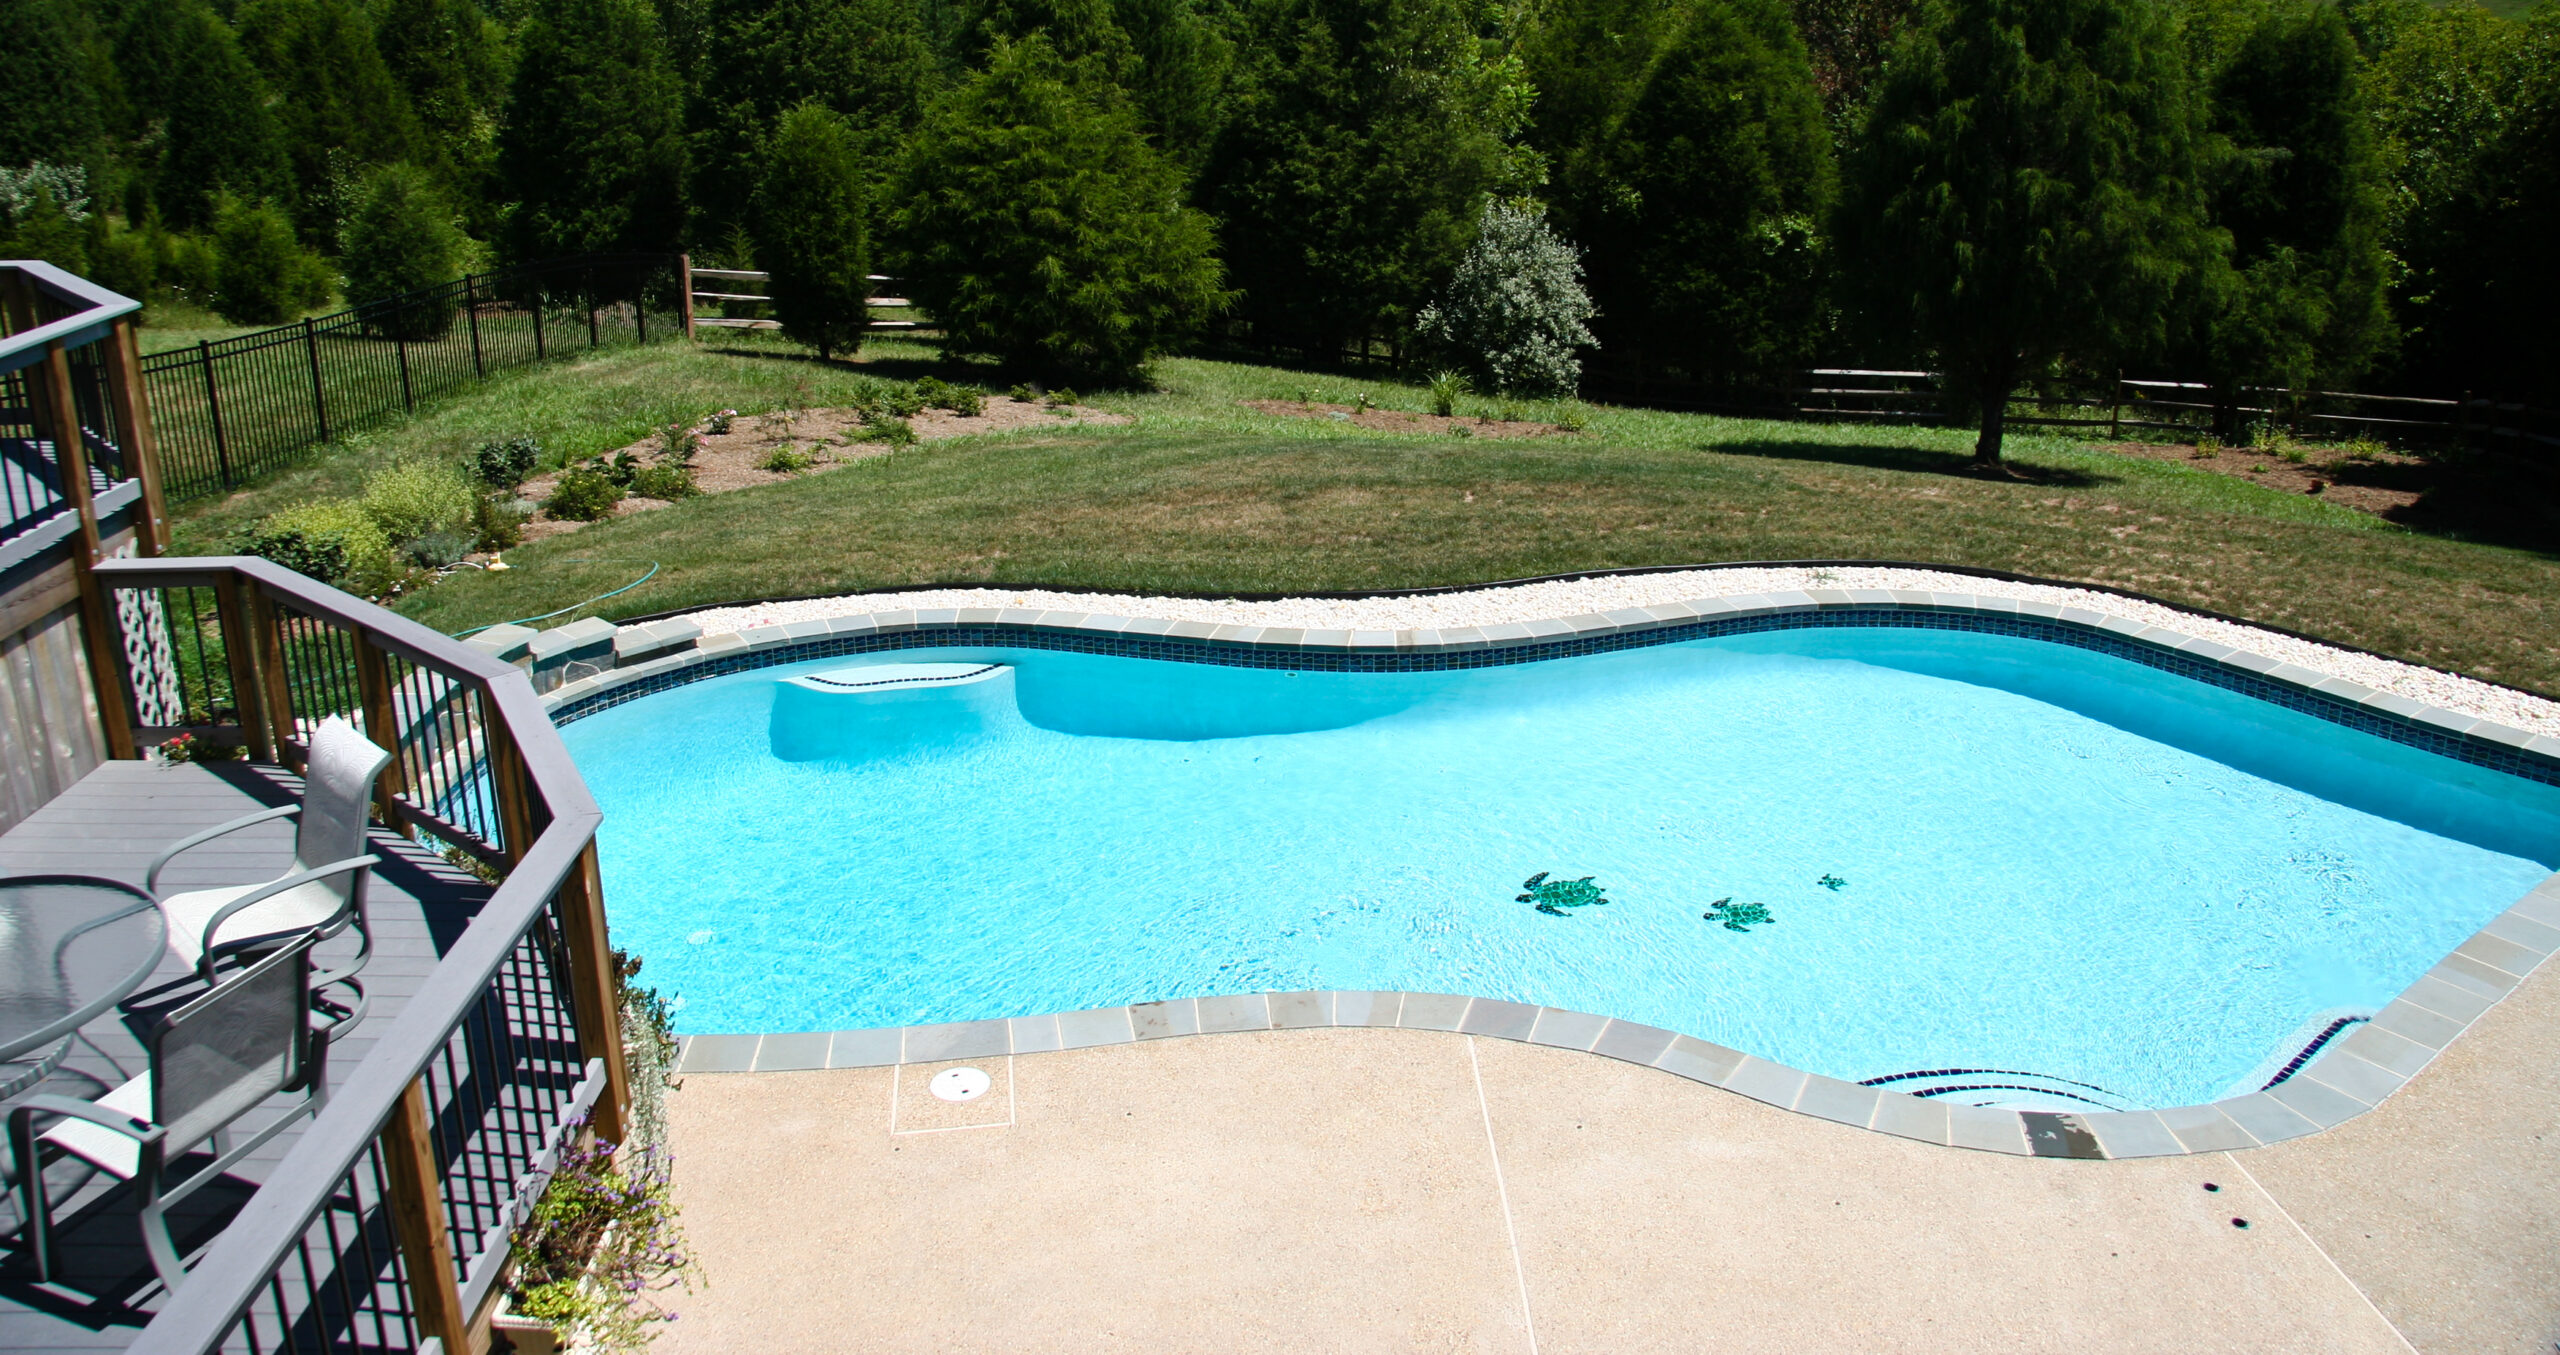 Backyard Pool in summer with surrounding multi-level deck